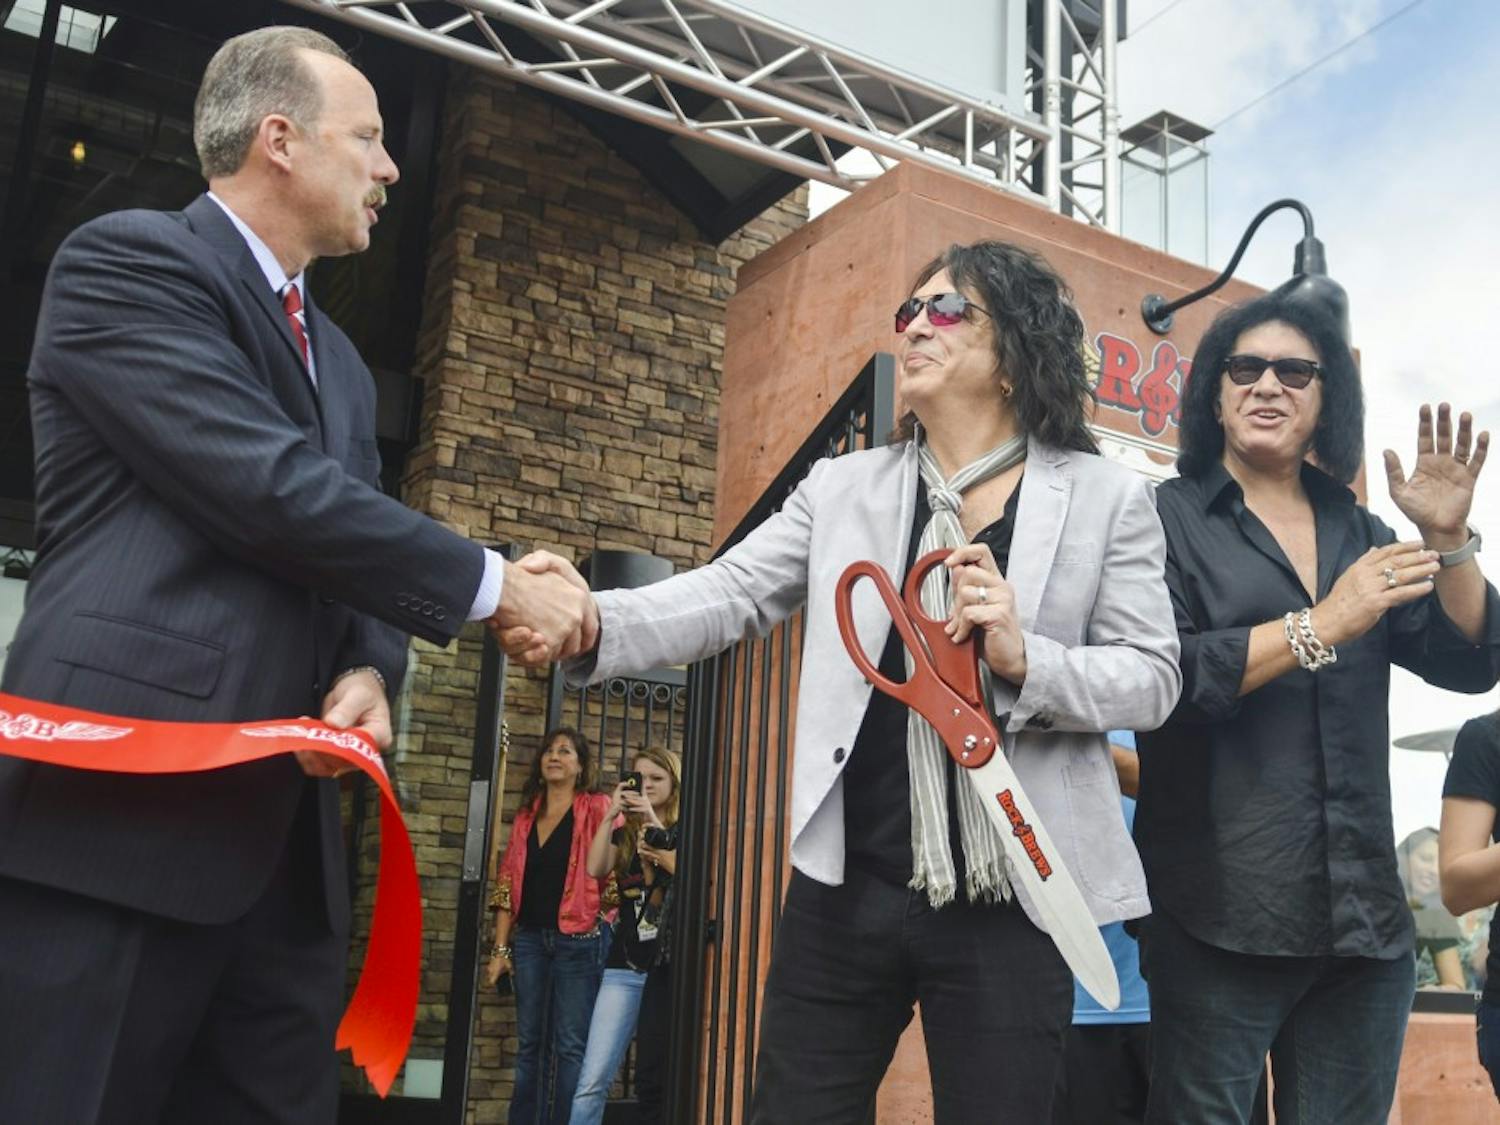 Mayor Richard Berry, left, shakes hands with KISS guitarist/vocalist Paul Stanley, center, after Stanley cuts the ribbon for the grand opening of Rock &amp; Brews, along with KISS bassist/vocalist Gene Simmons, far right, on Tuesday morning. Rock &amp; Brews is a rock ‘n’ roll-themed family restaurant co-owned by Stanley and Simmons, along with Michael Zislis and brothers Dave and Dell Furano.